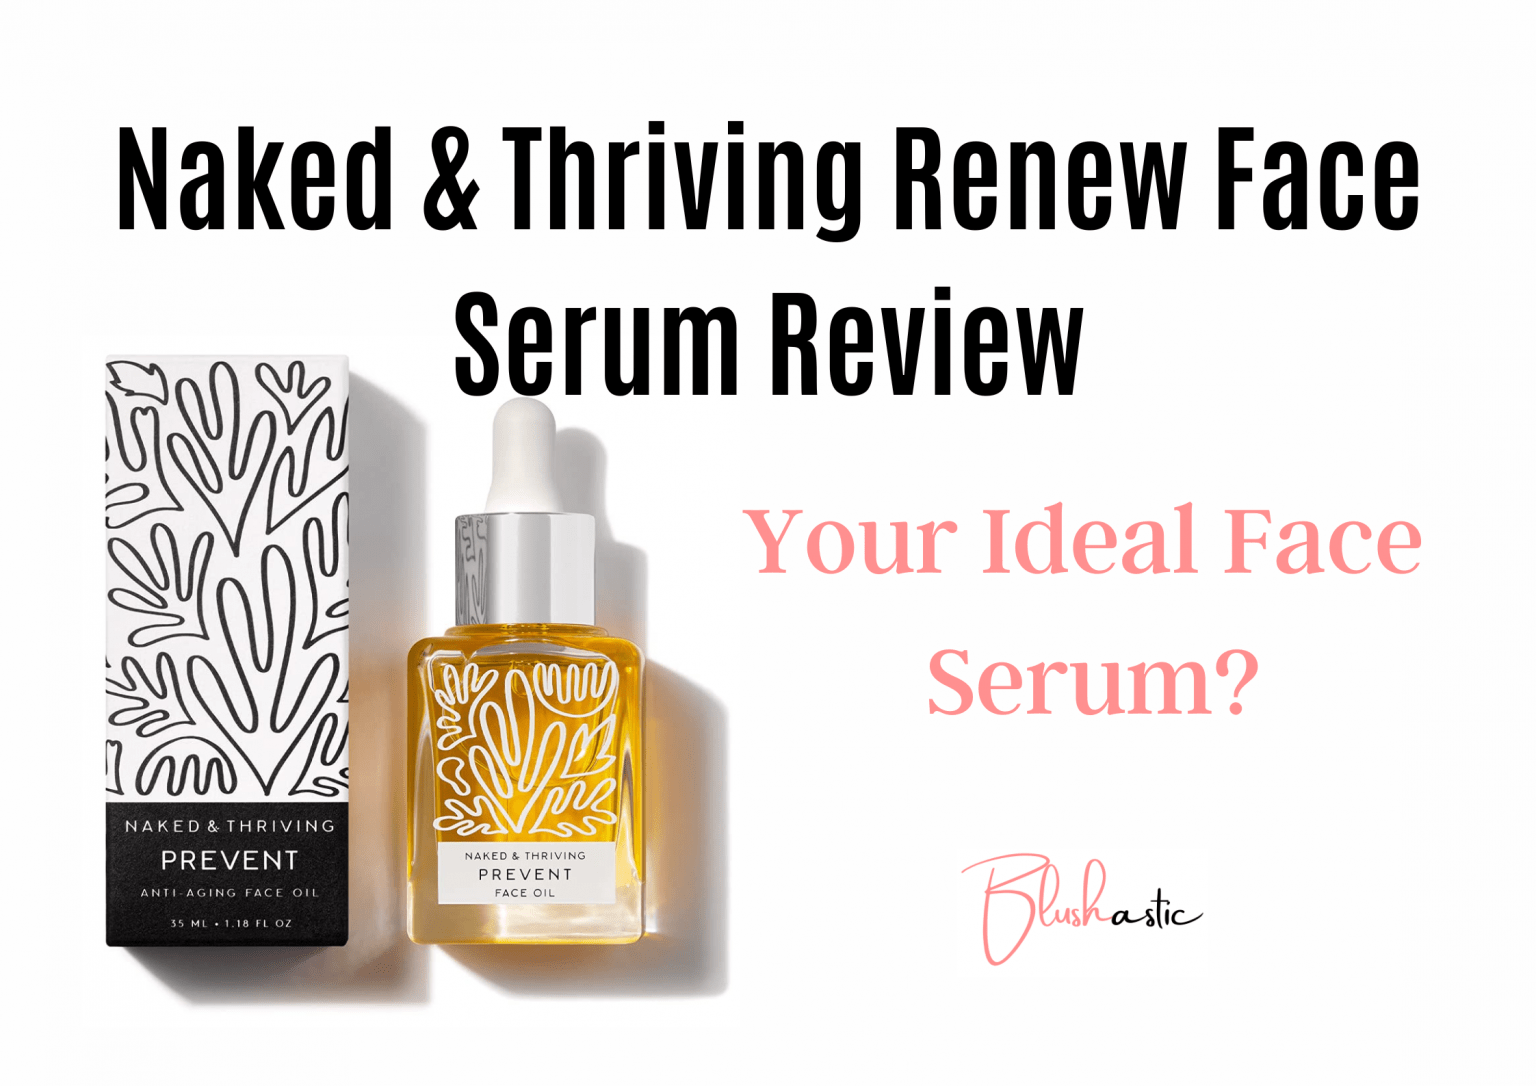 Naked Thriving Renew Serum Reviews Does It Work Blushastic